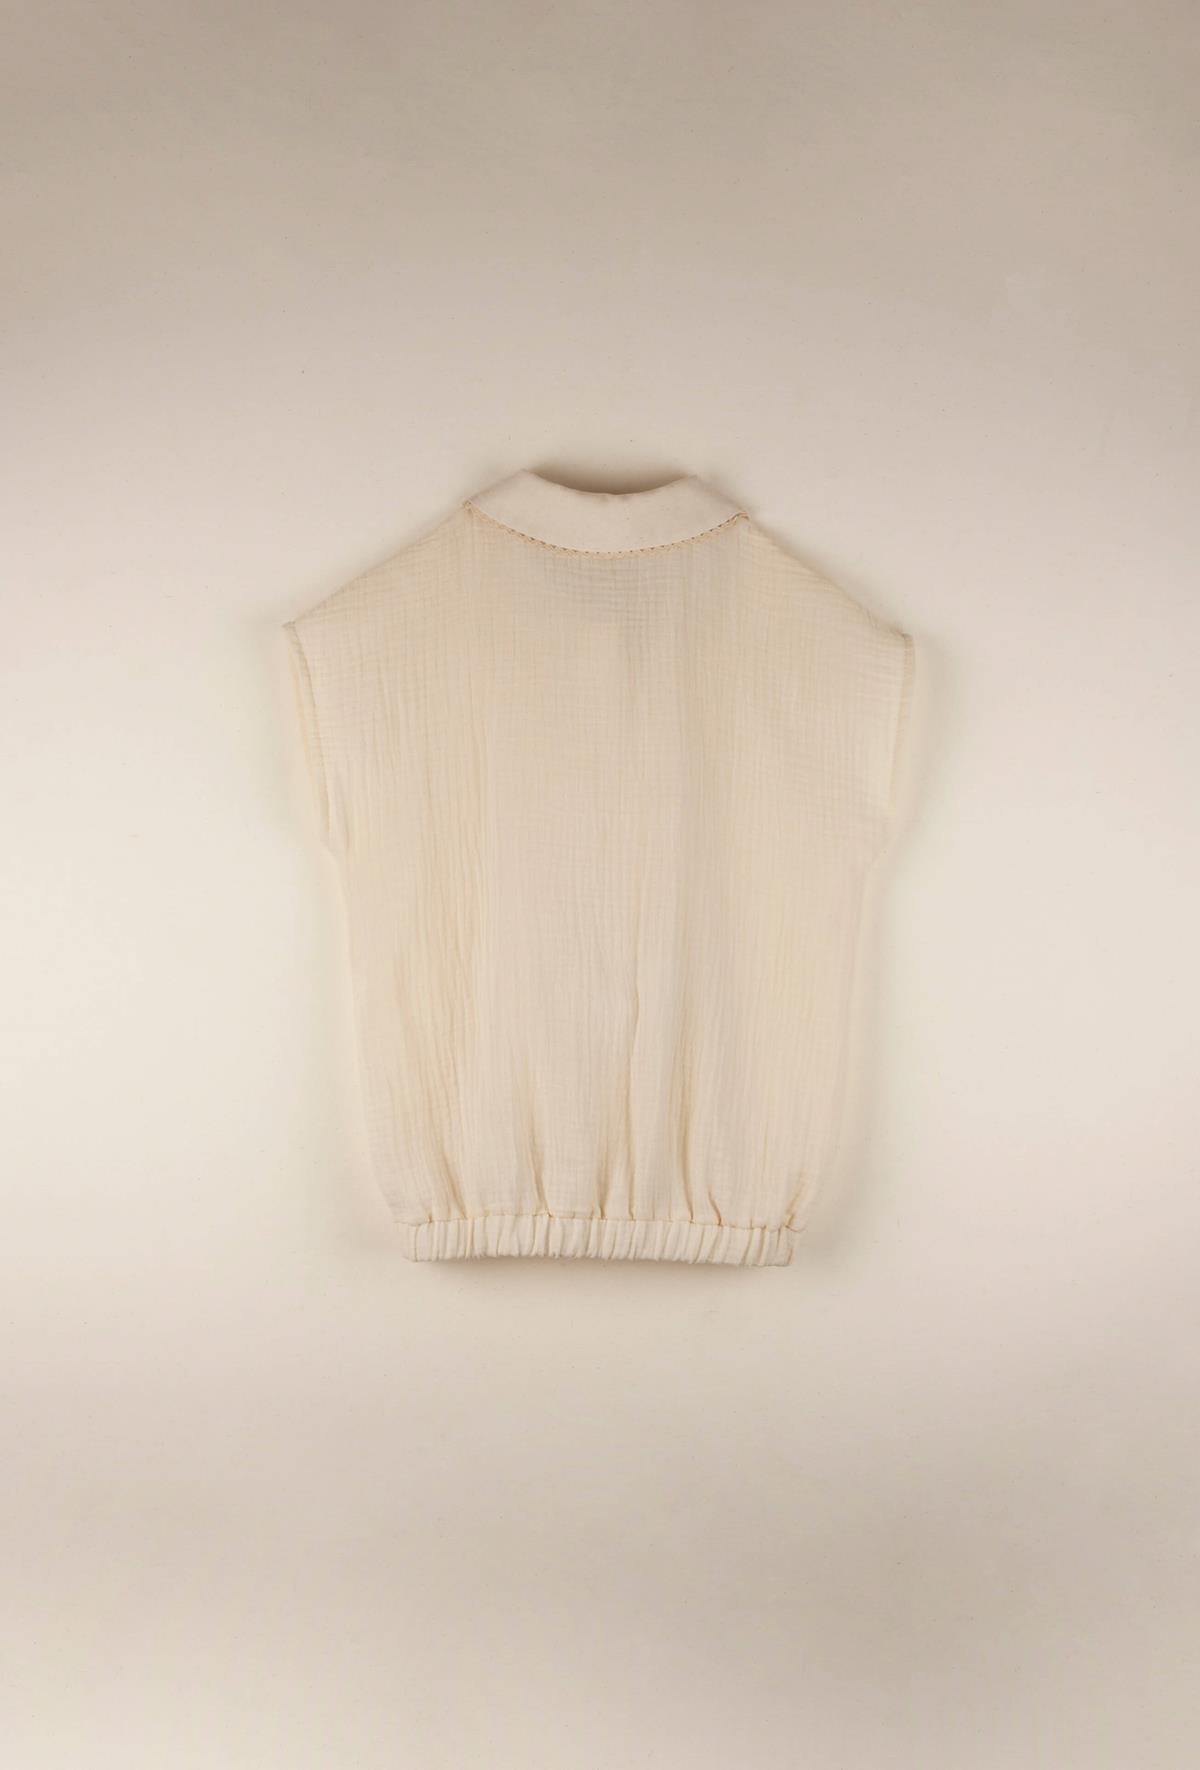 Mod.17.4 Off white organic blouse with embroidered collar | SS22 Mod.17.4 Off white blouse with embroidered collar | 1